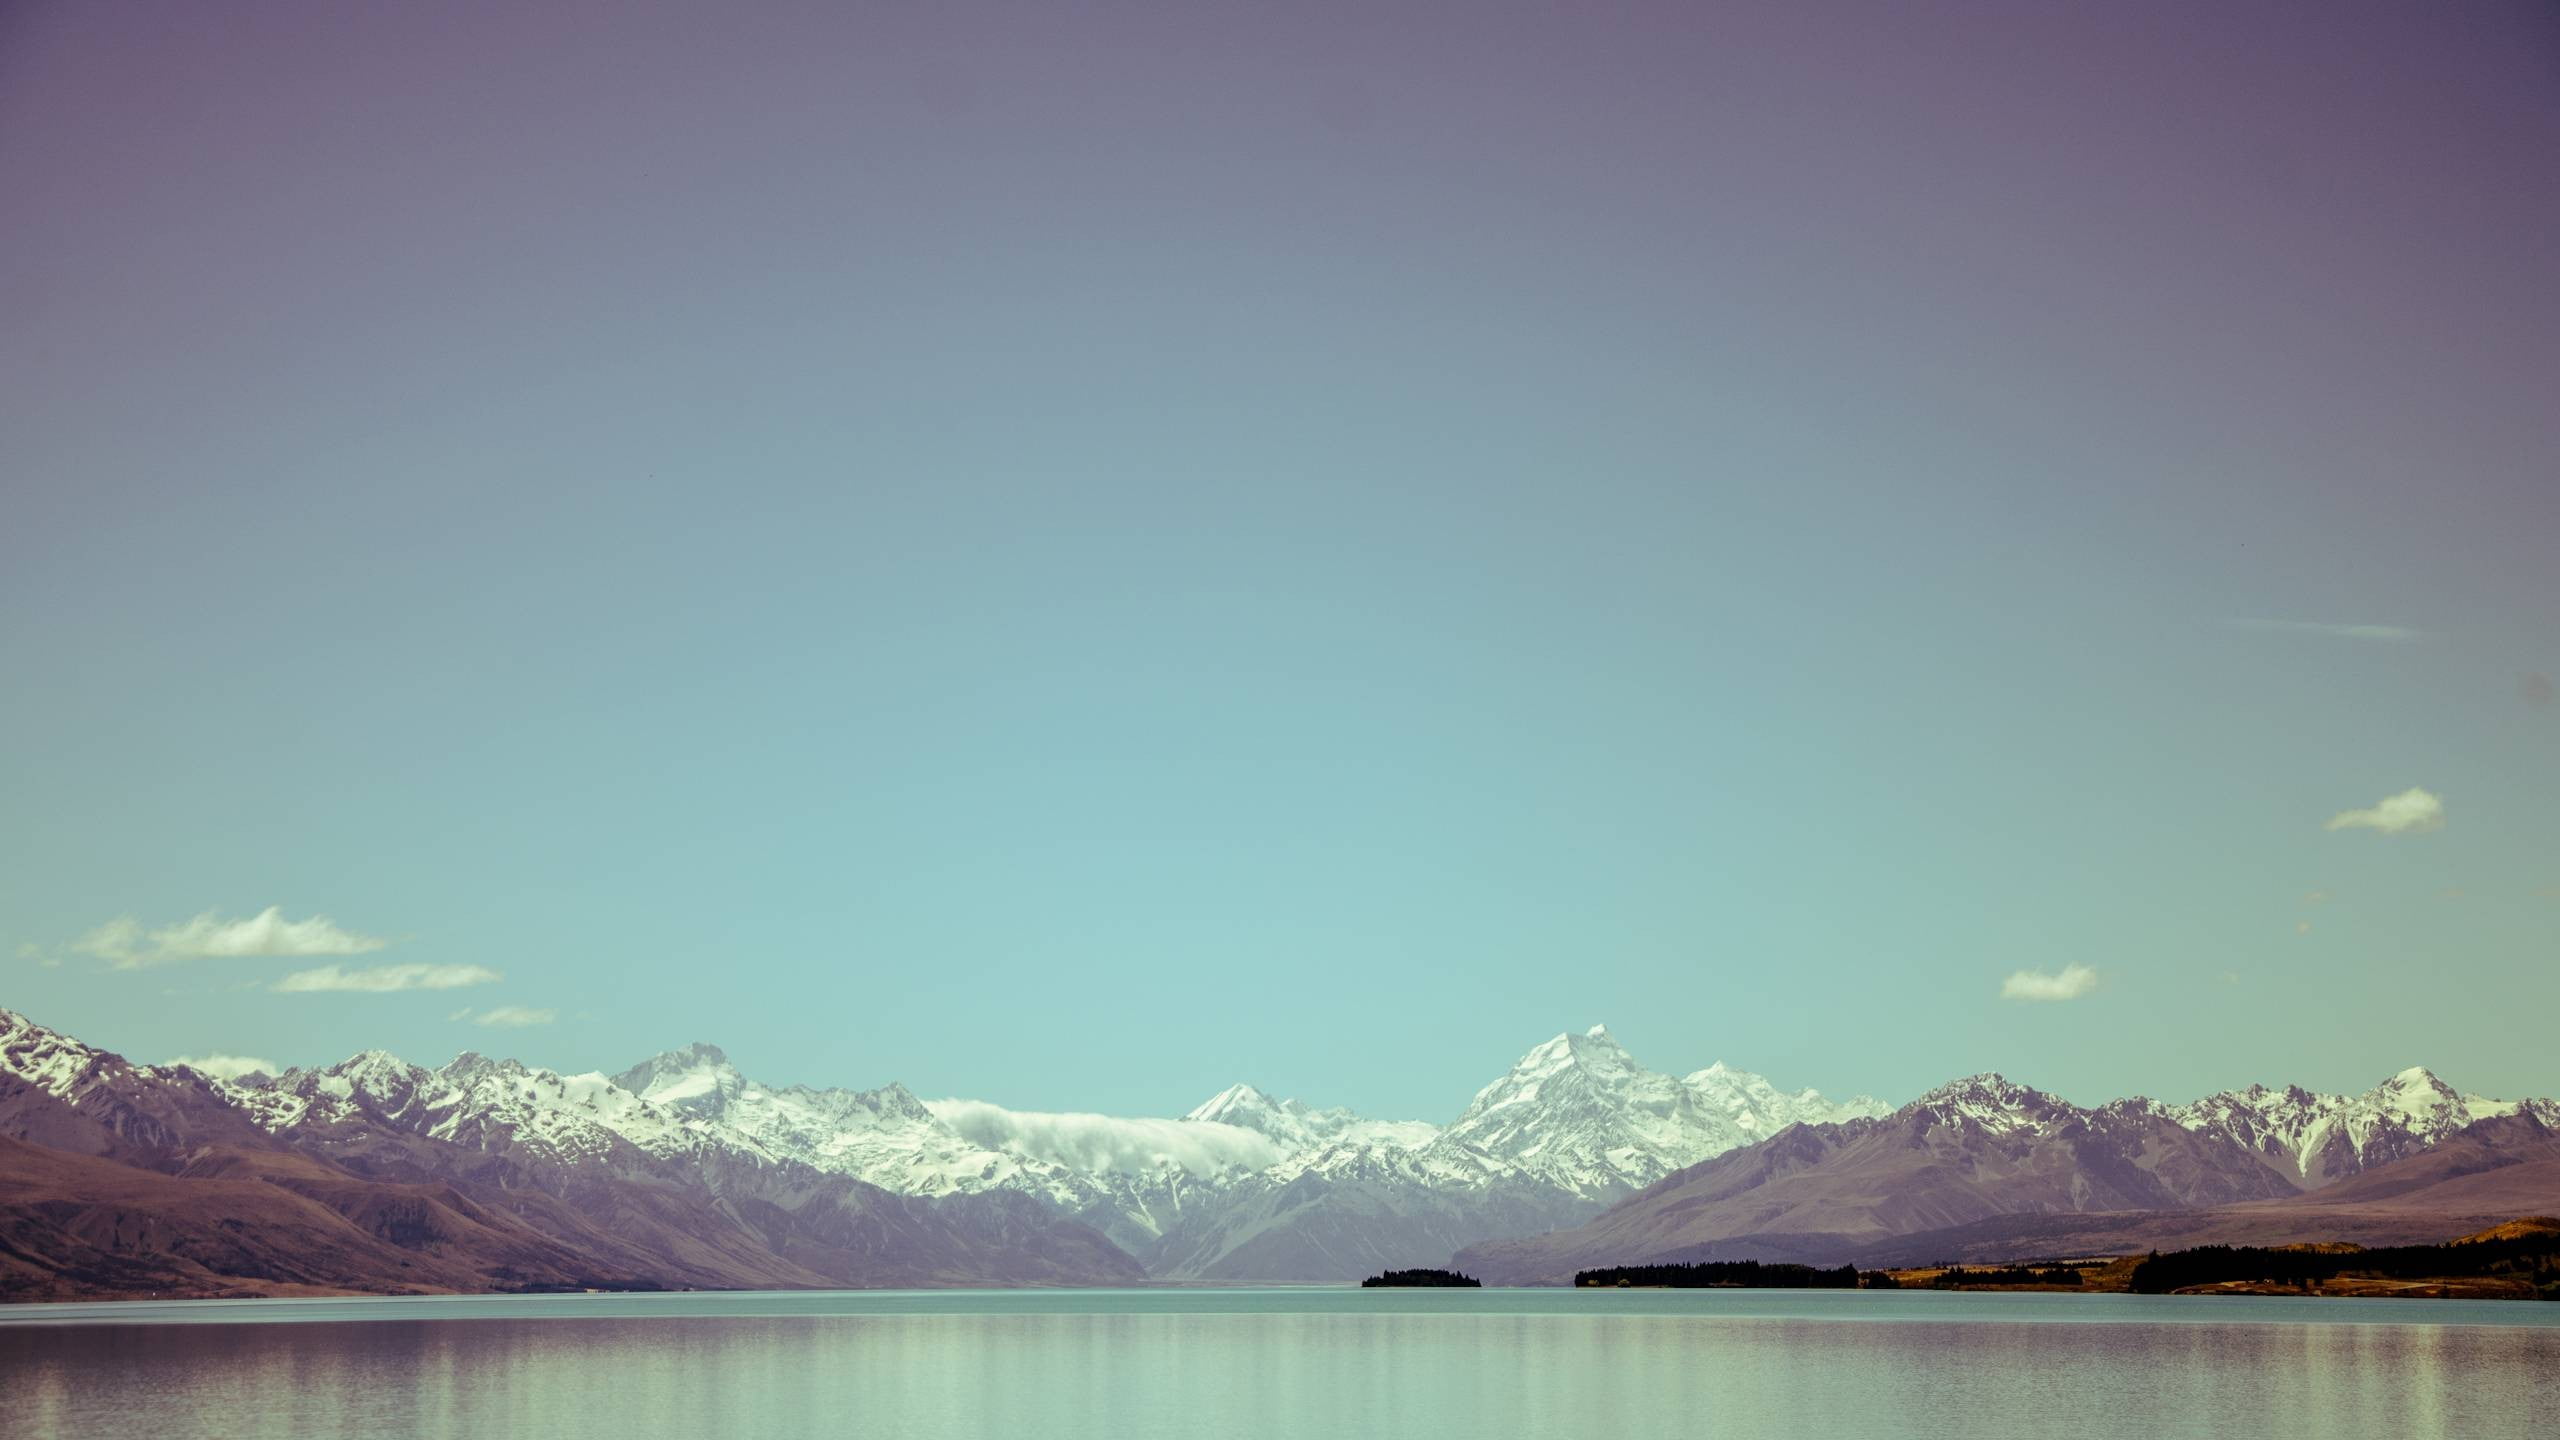 body of water and mountains, landscape, sky, lake, nature, clear sky